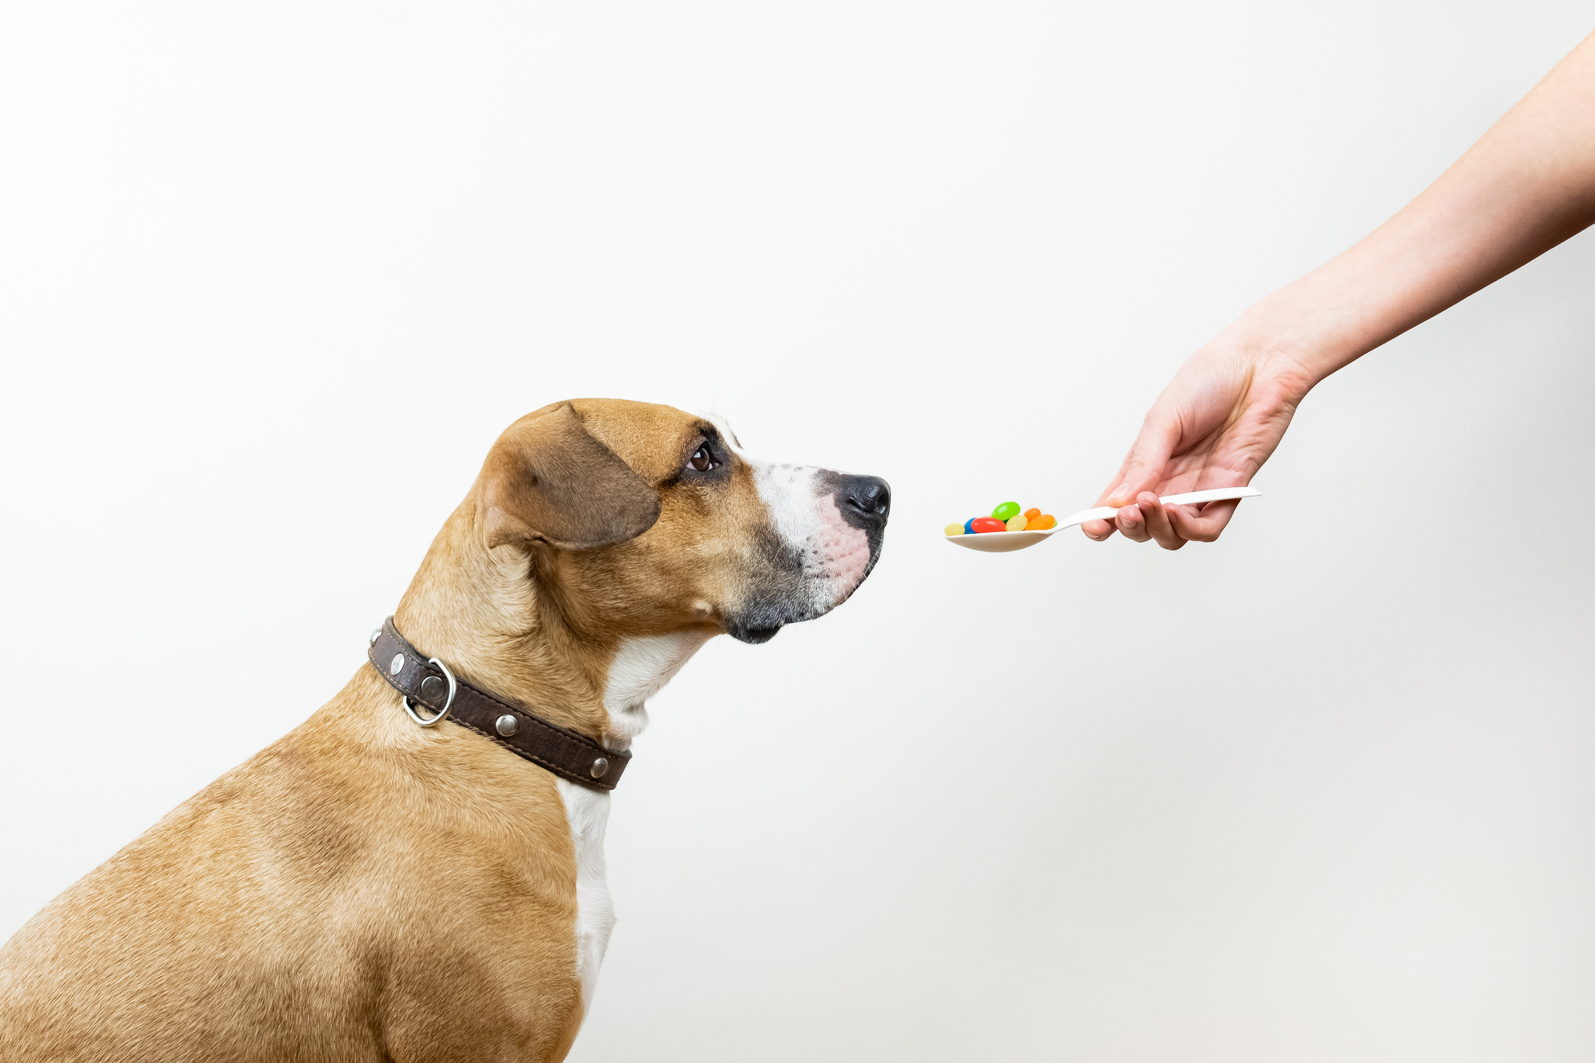 Giving  spoon with medicine pills to a dog